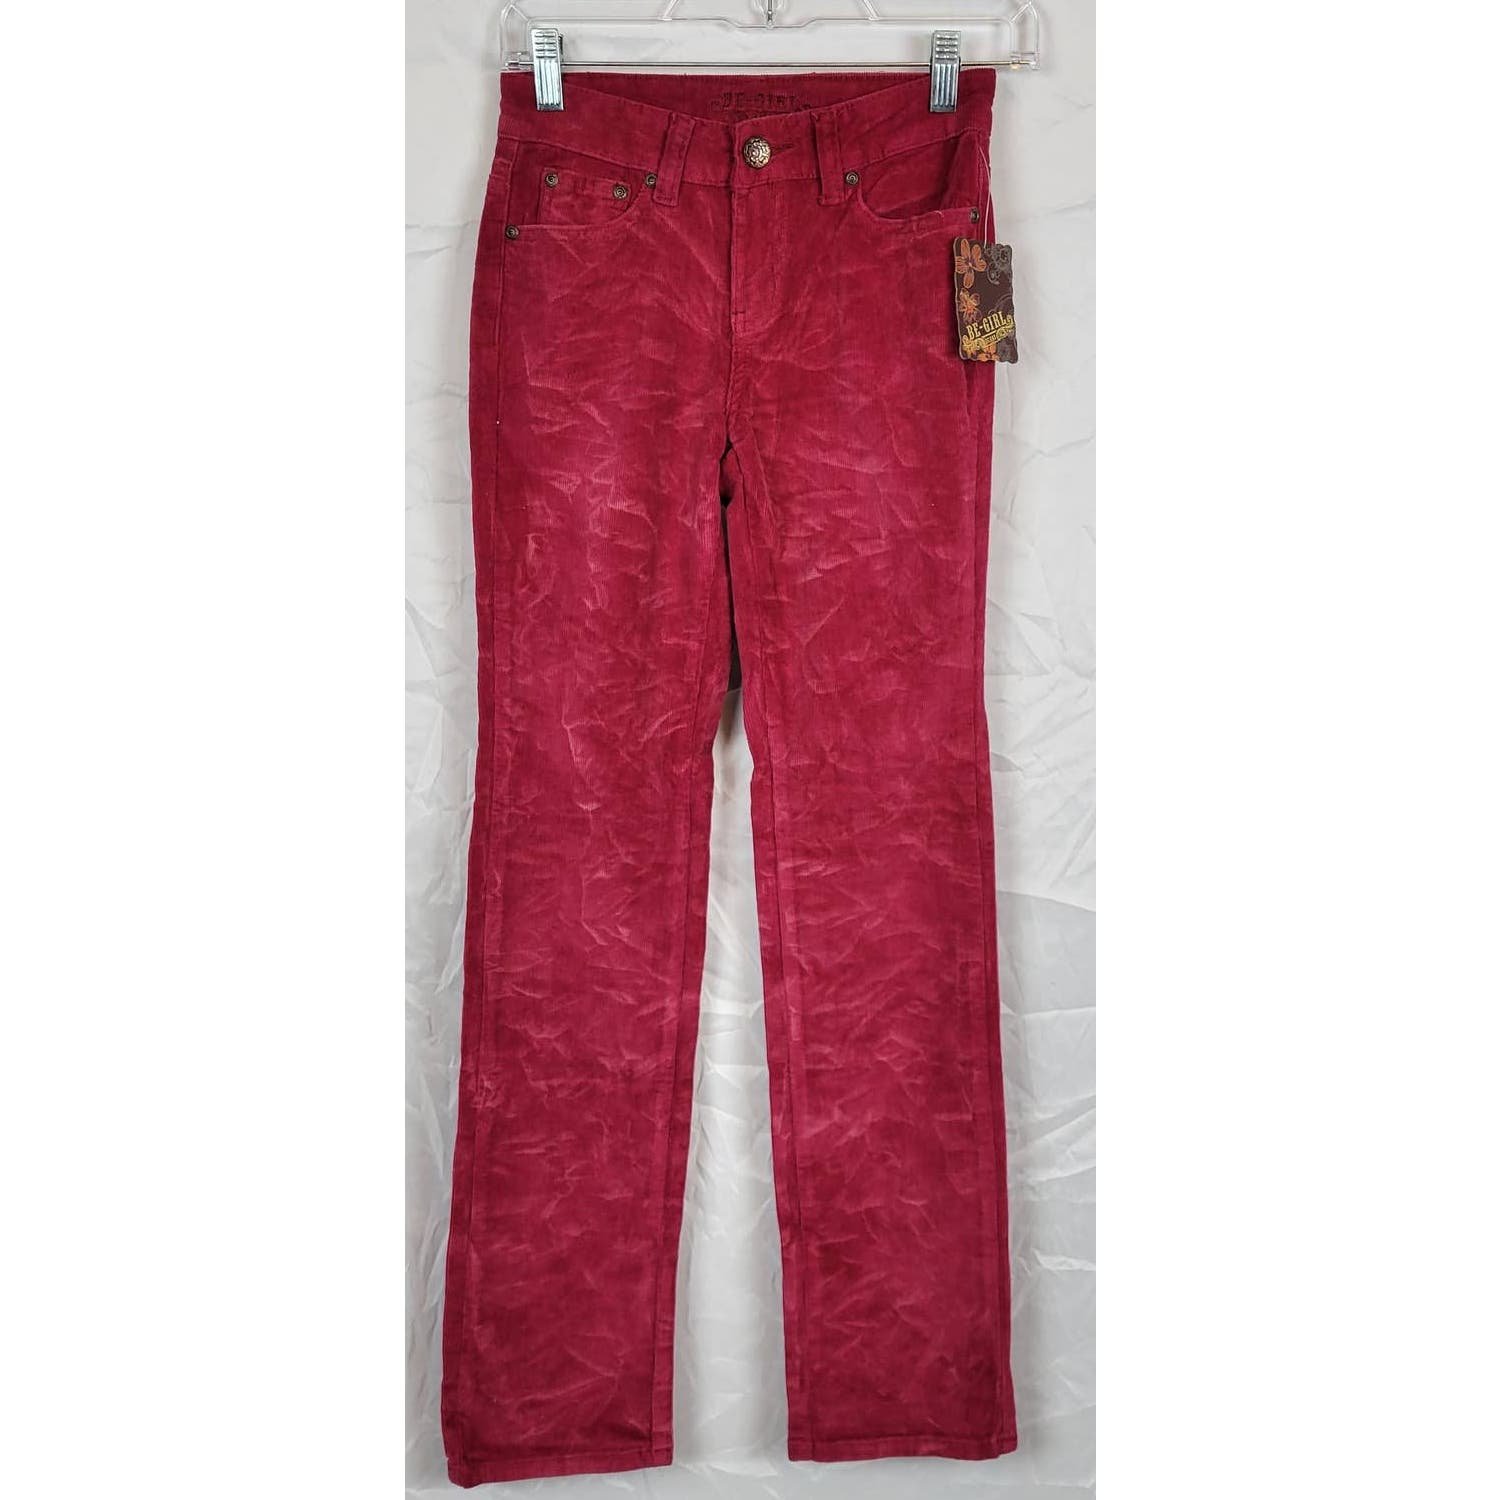 Be-Girl Rose Pink Jeans Women´s 1/2 NWT IO8uxSjF8